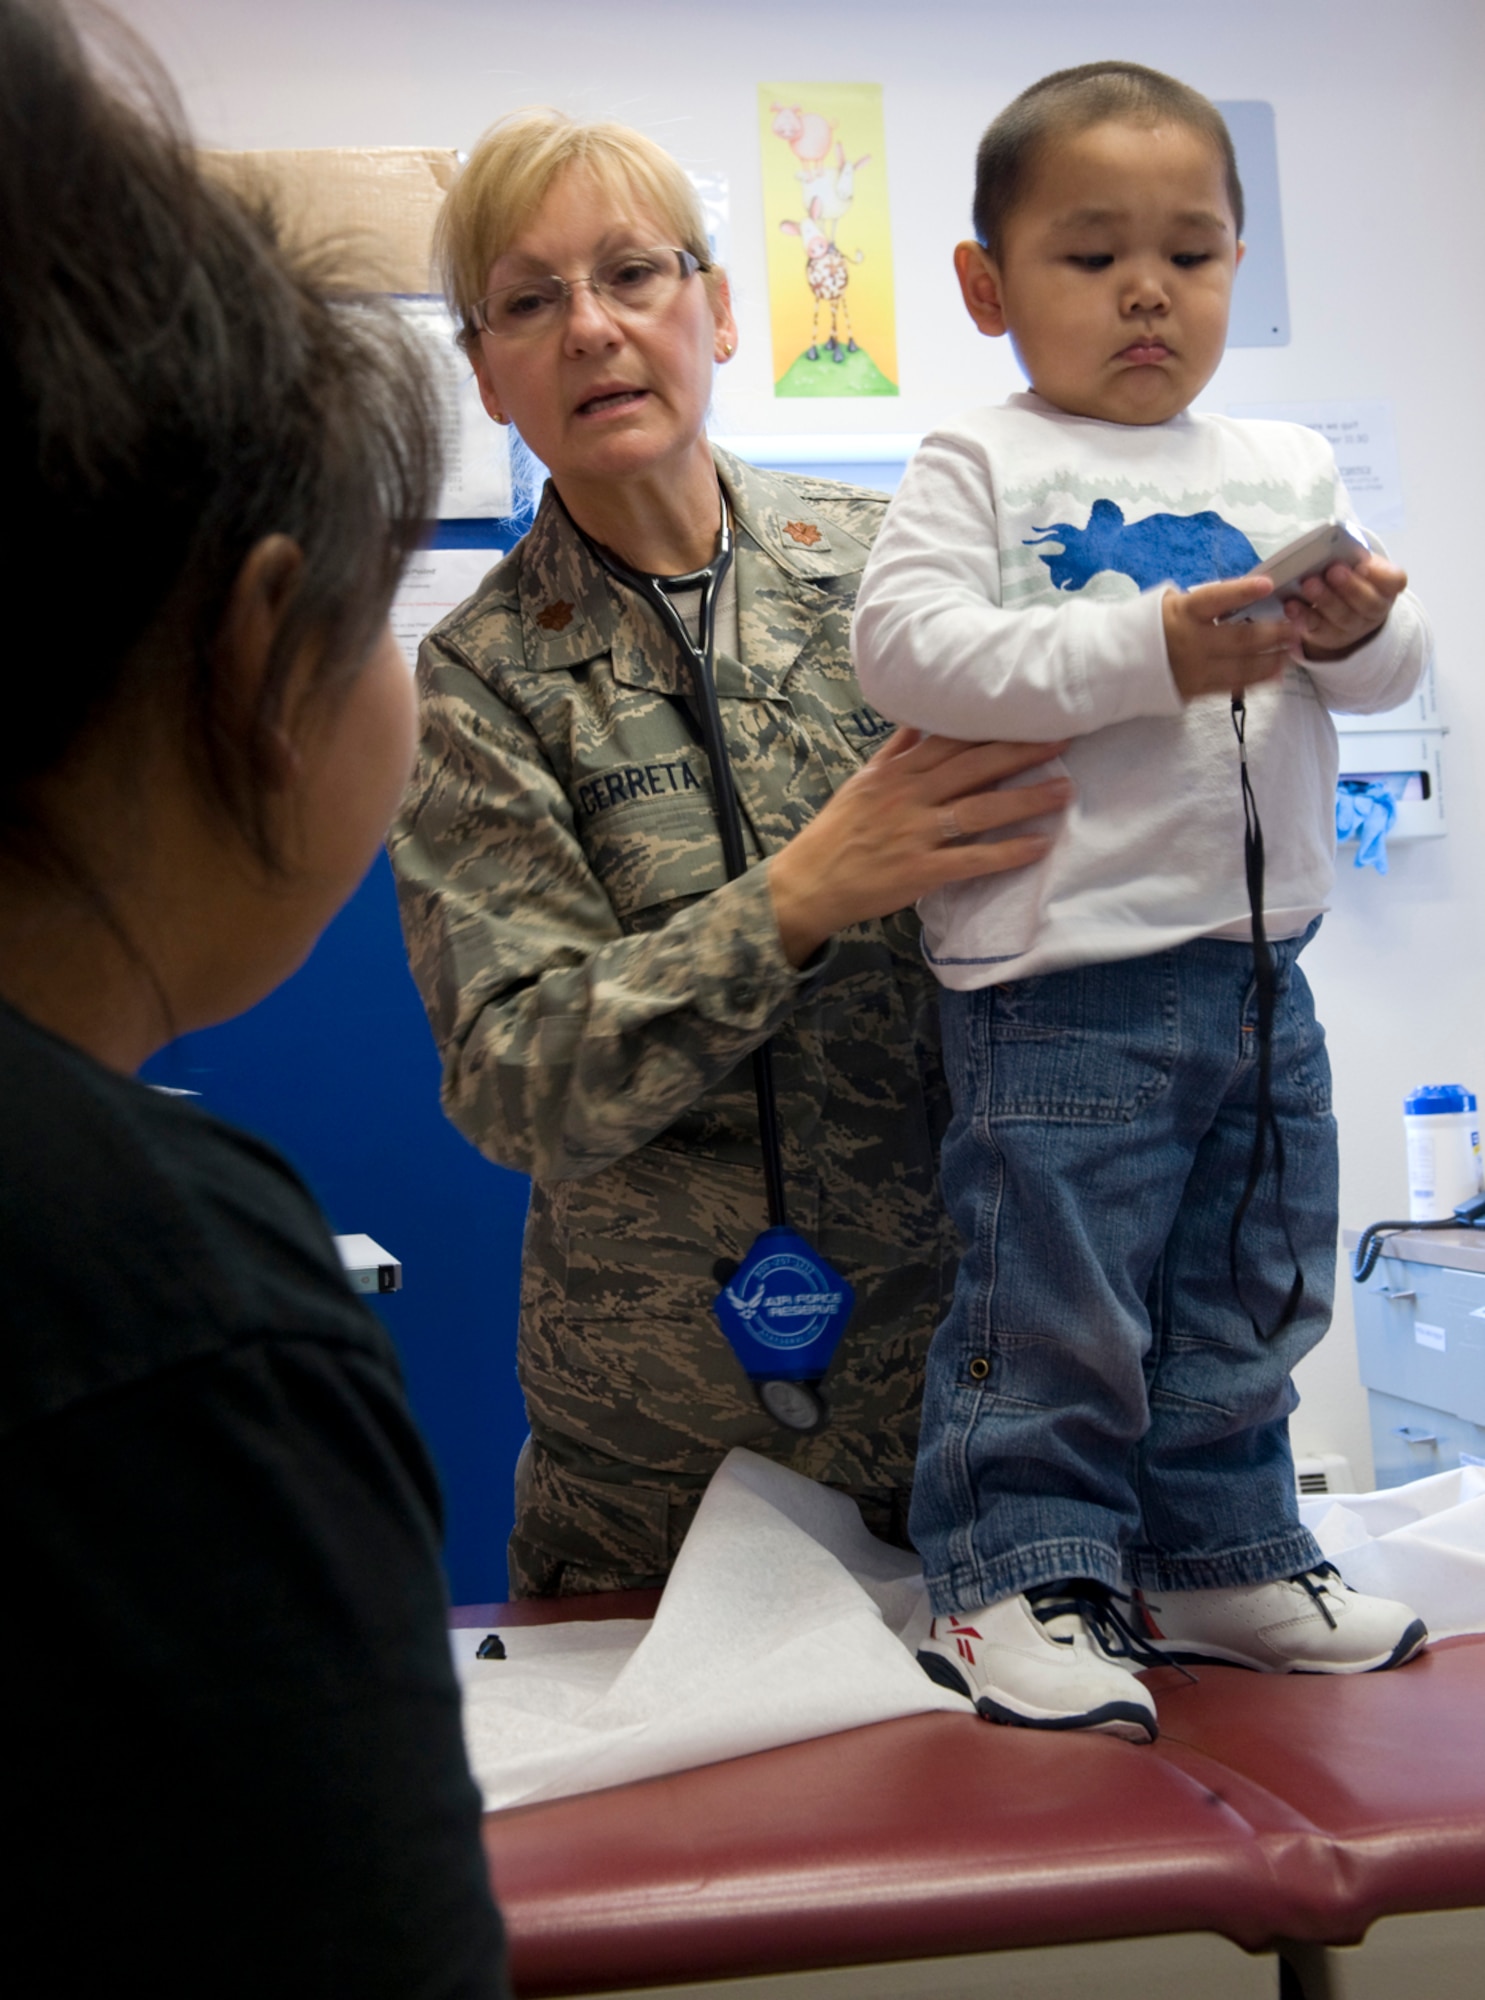 Maj. Emily Cerreta consults Laura Ballot, mother of 23-month-old Hikerr Snyder, during his well-baby checkup April 14, 2010, in Noorvik, Alaska. Major Cerreta is a family nurse practitioner from the 433rd Airlift Wing at Lackland Air Force Base, Texas, and is in Alaska for Operation Arctic Care, a joint medical training exercise.  (U.S. Air Force photo/Master Sgt. Jack Braden)